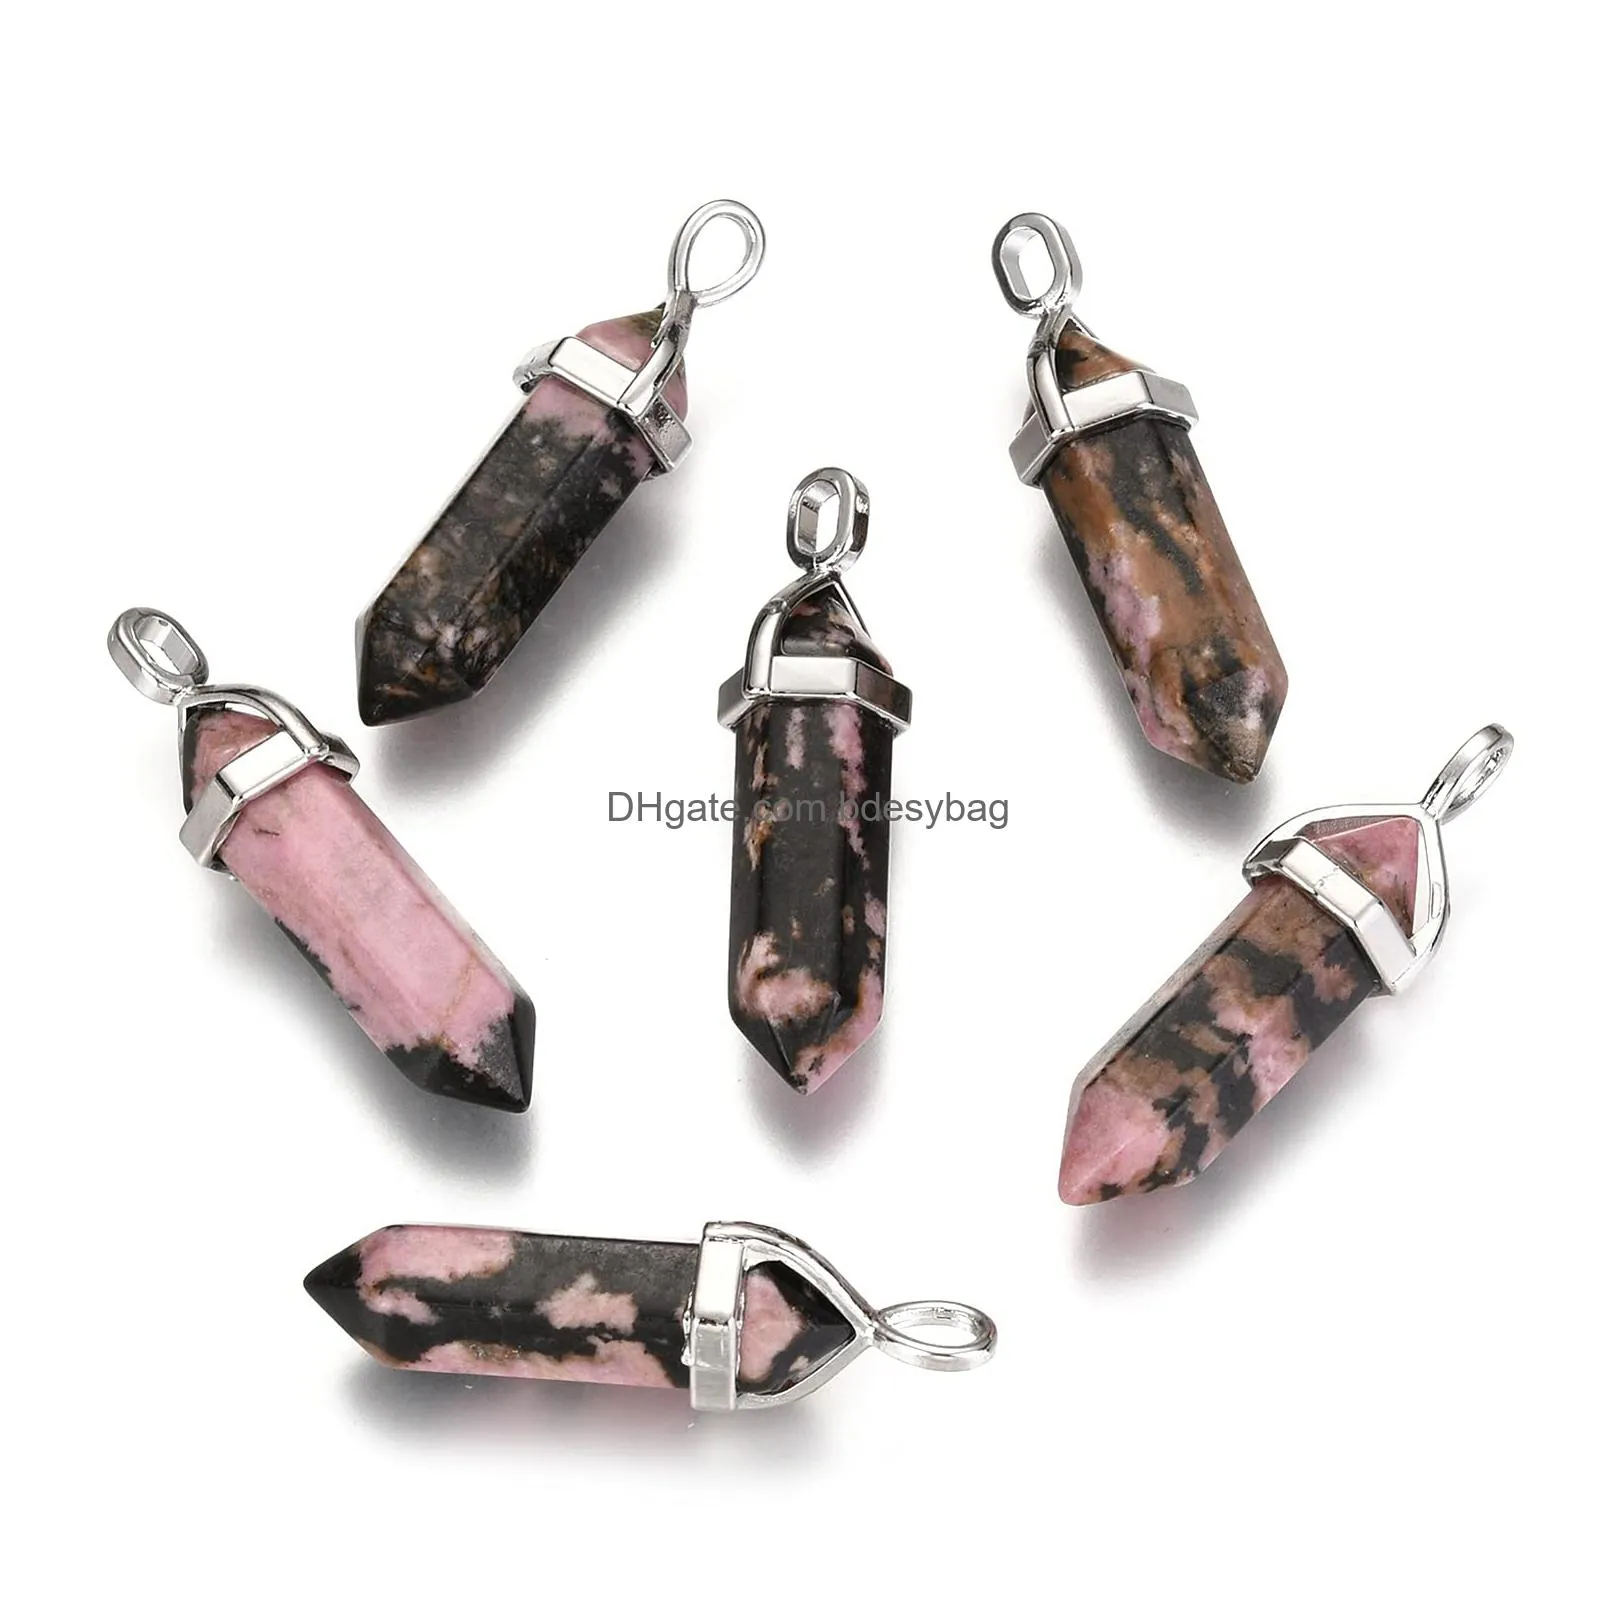 padnahall hexagonal pointed natural gemstone pendant rhodonite bullet healing pointed chakra stone charms for necklace jewelry making hole 3mm